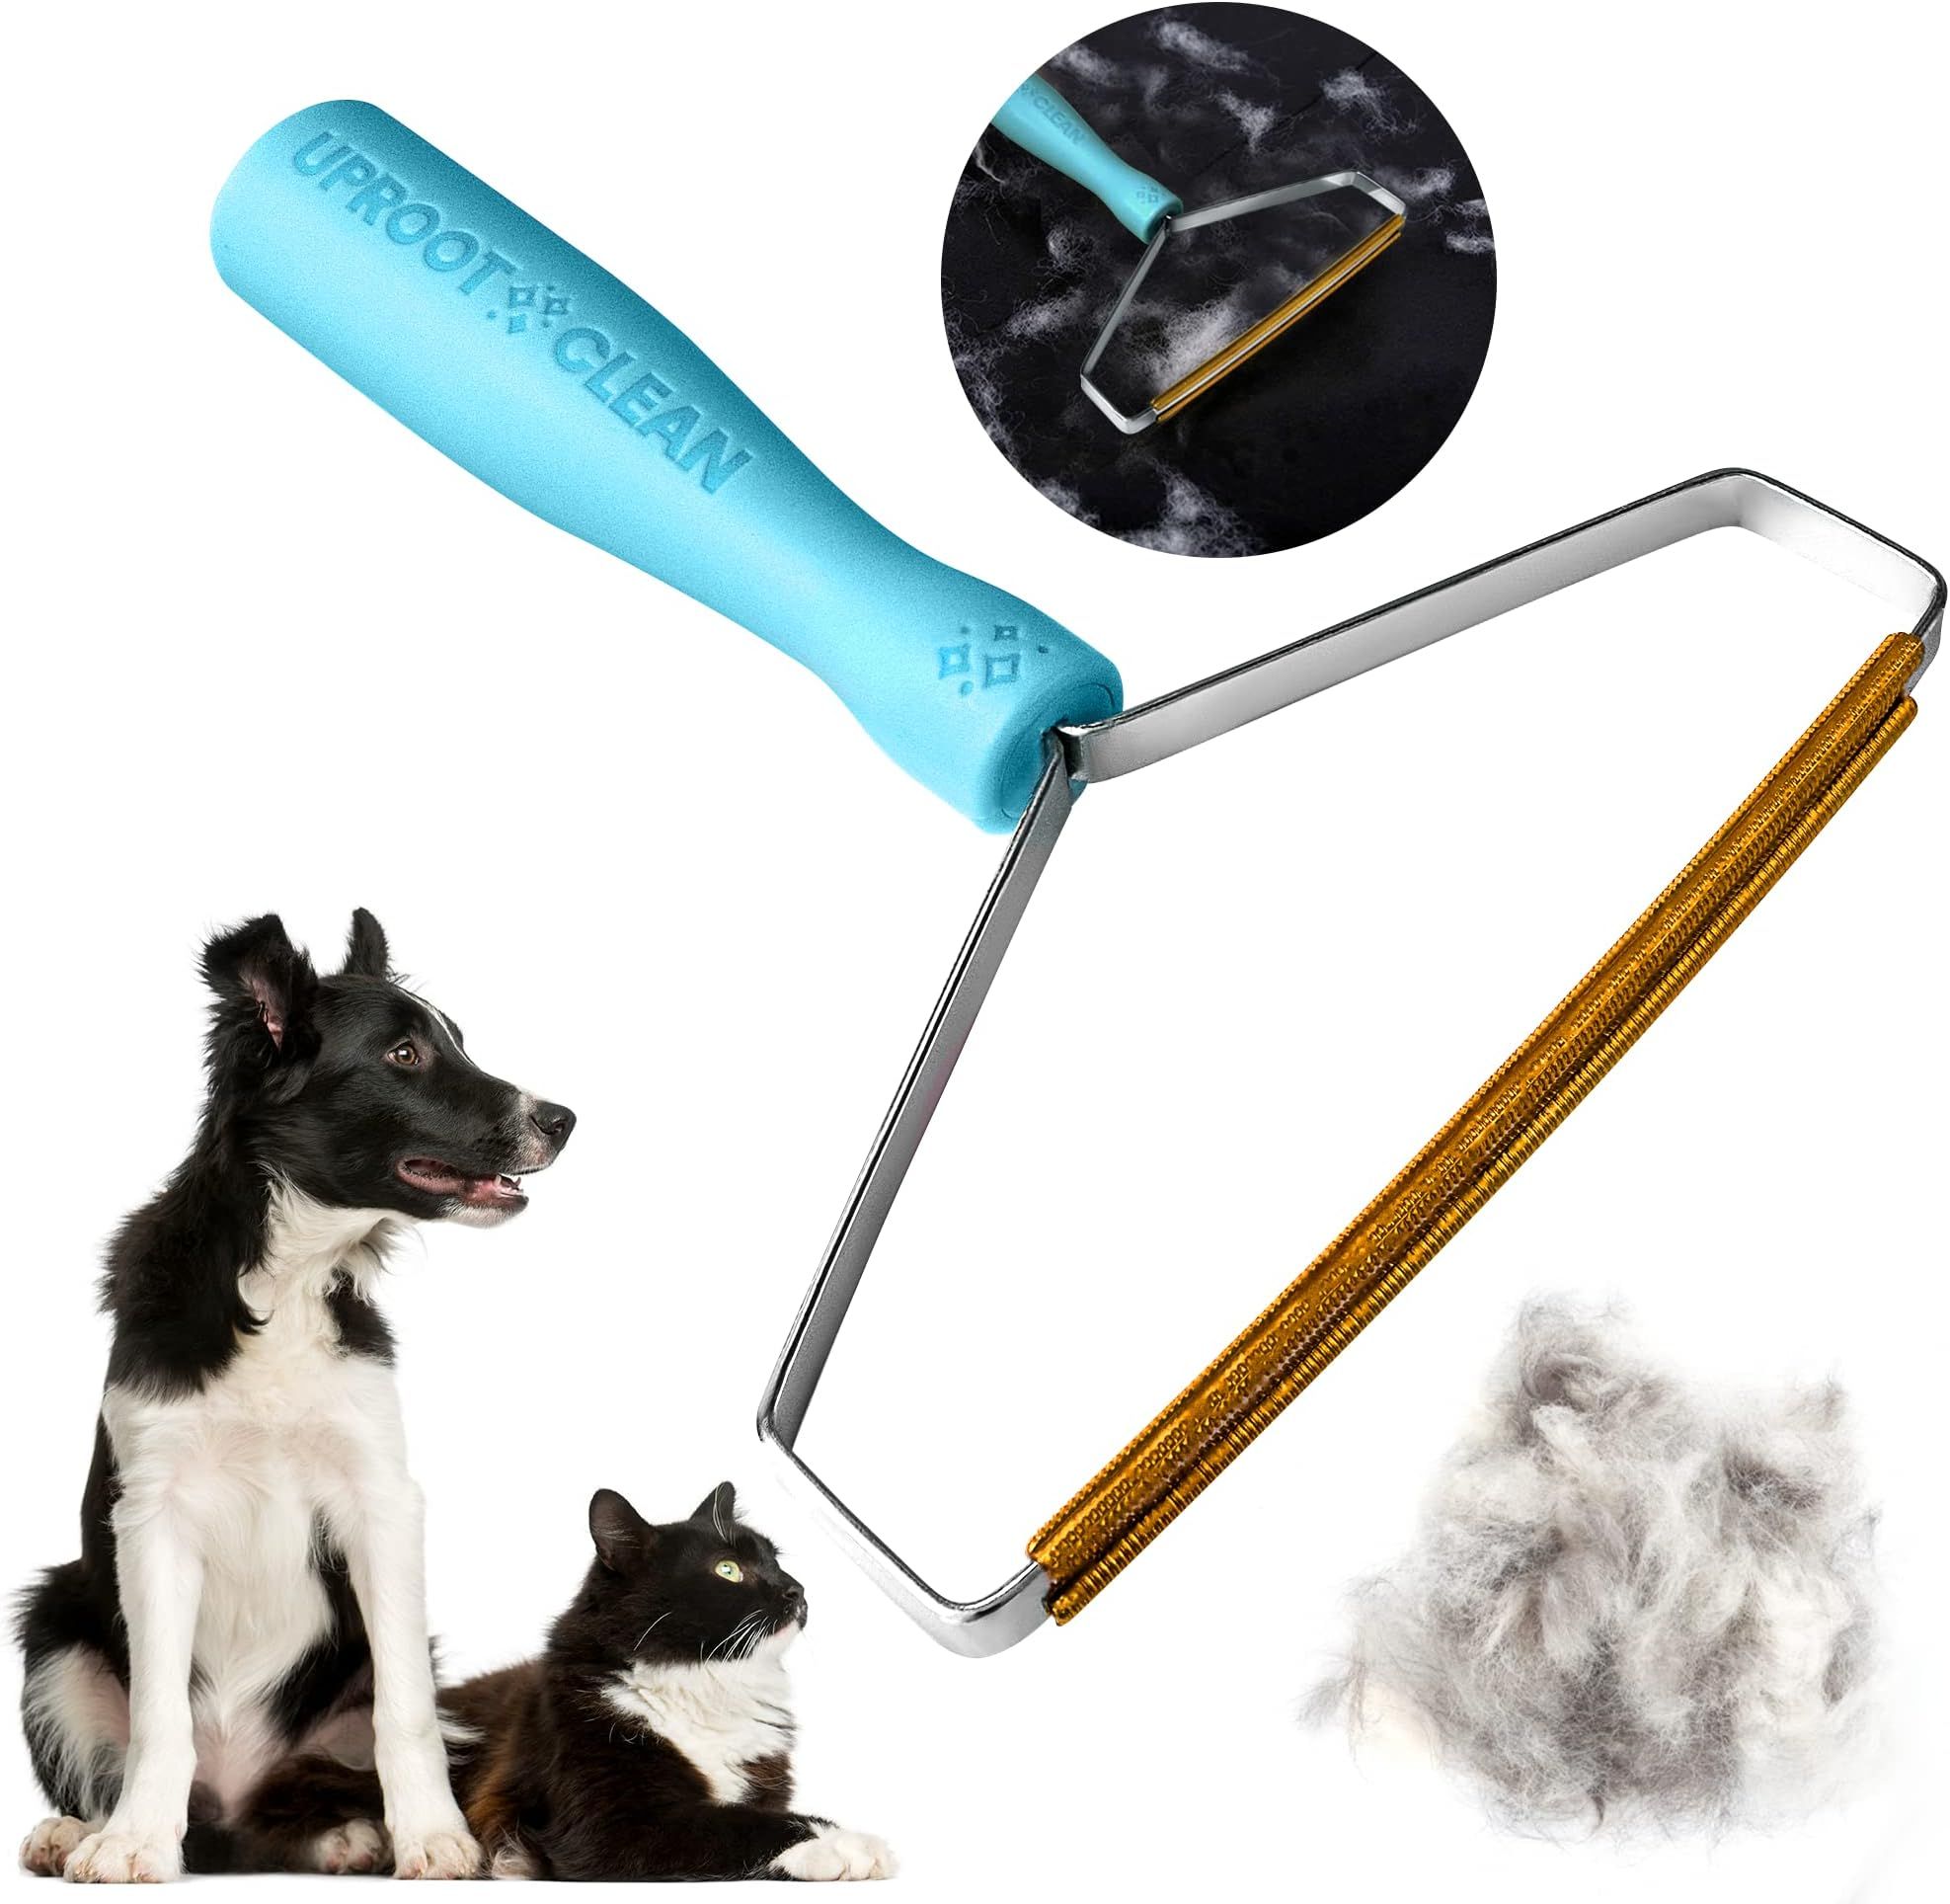 Uproot Cleaner Pro Reusable Pet Hair Remover - The Non-Damaging Lint Remover and Carpet Scraper by U | Amazon (US)